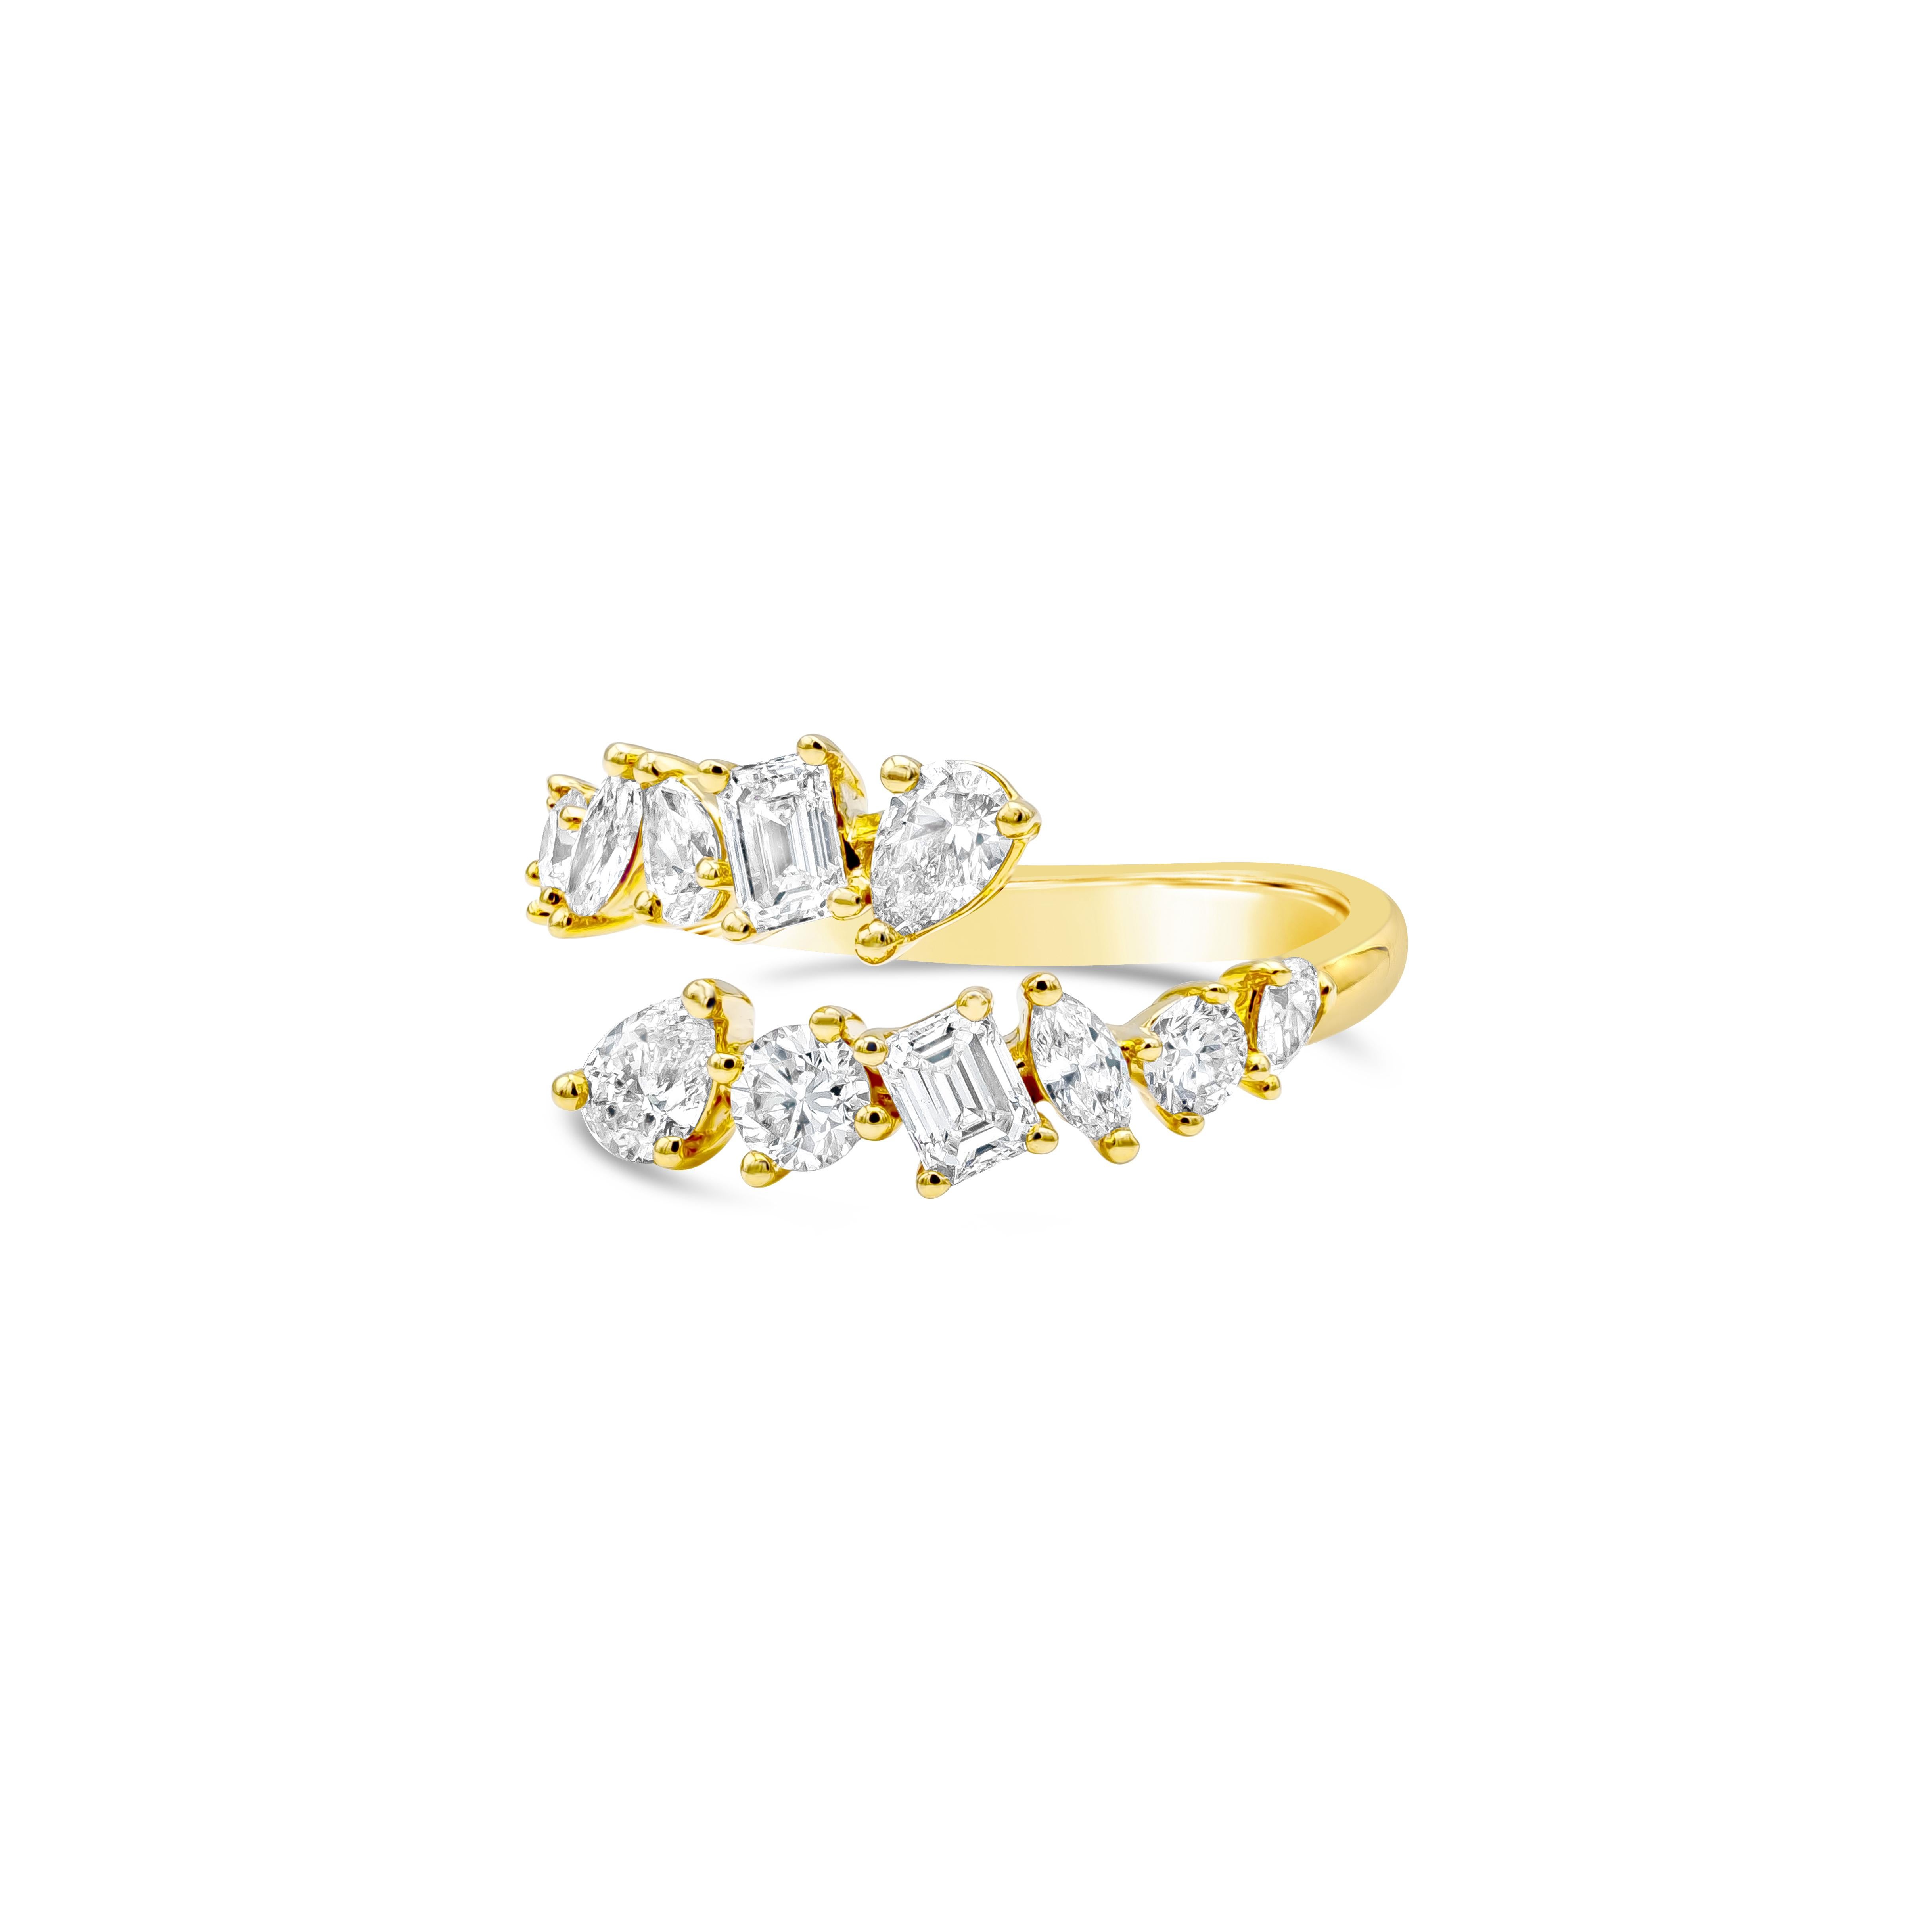 A very chic, distinctive and fashionable ring showcasing a series of mixed cut diamonds in a two row inter-twisting design that consist of pear shape, brilliant round, marquise and emerald cut. Diamonds weigh 1.32 carats total, G-H Color and SI in